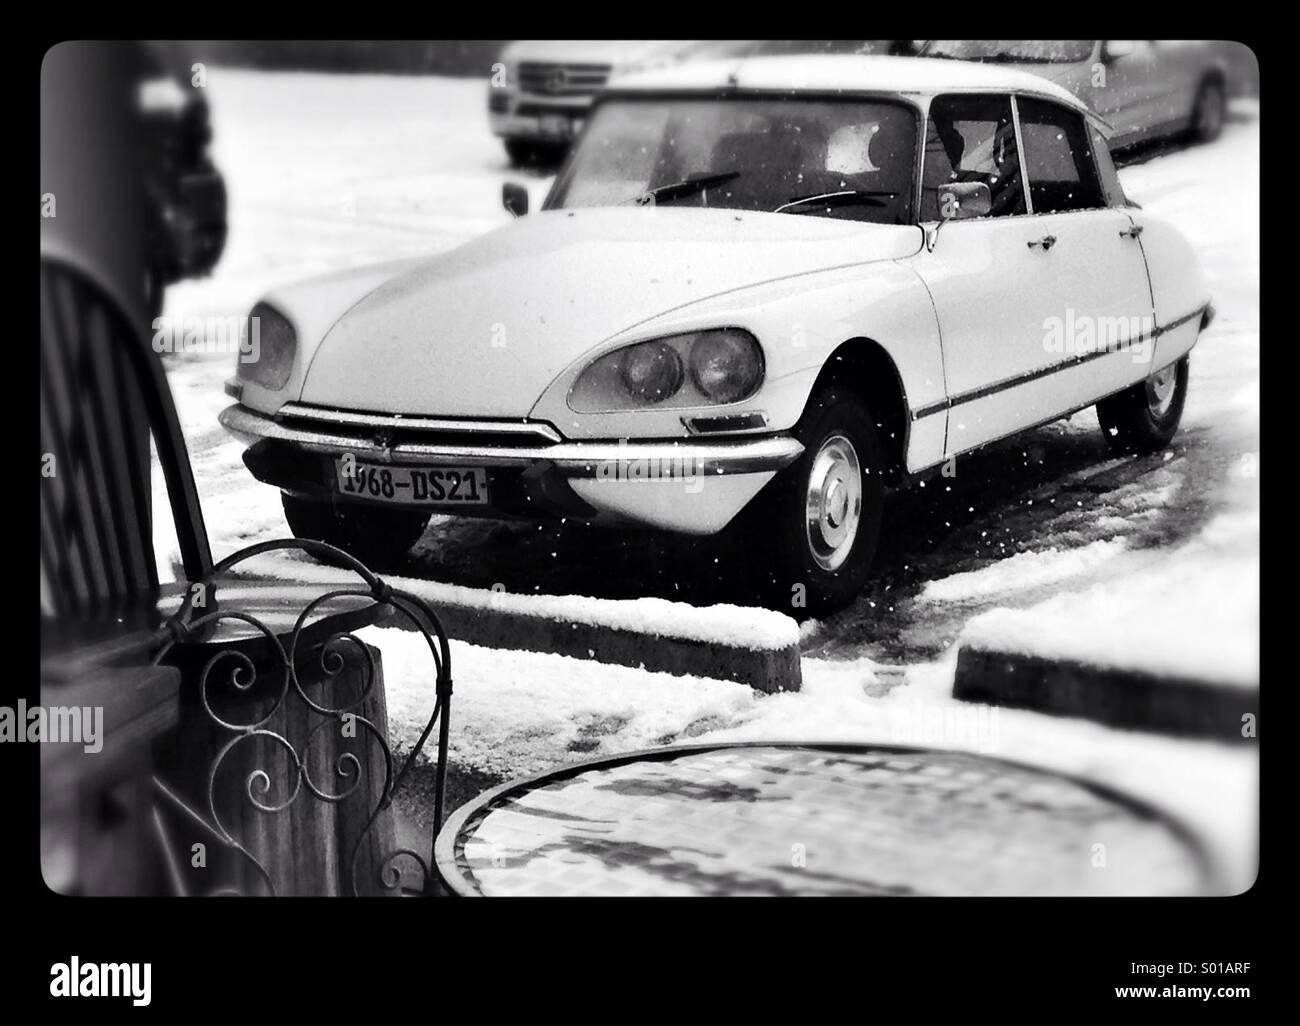 1968 French Citroen DS21 outside a cafe window on a snowy day. Stock Photo